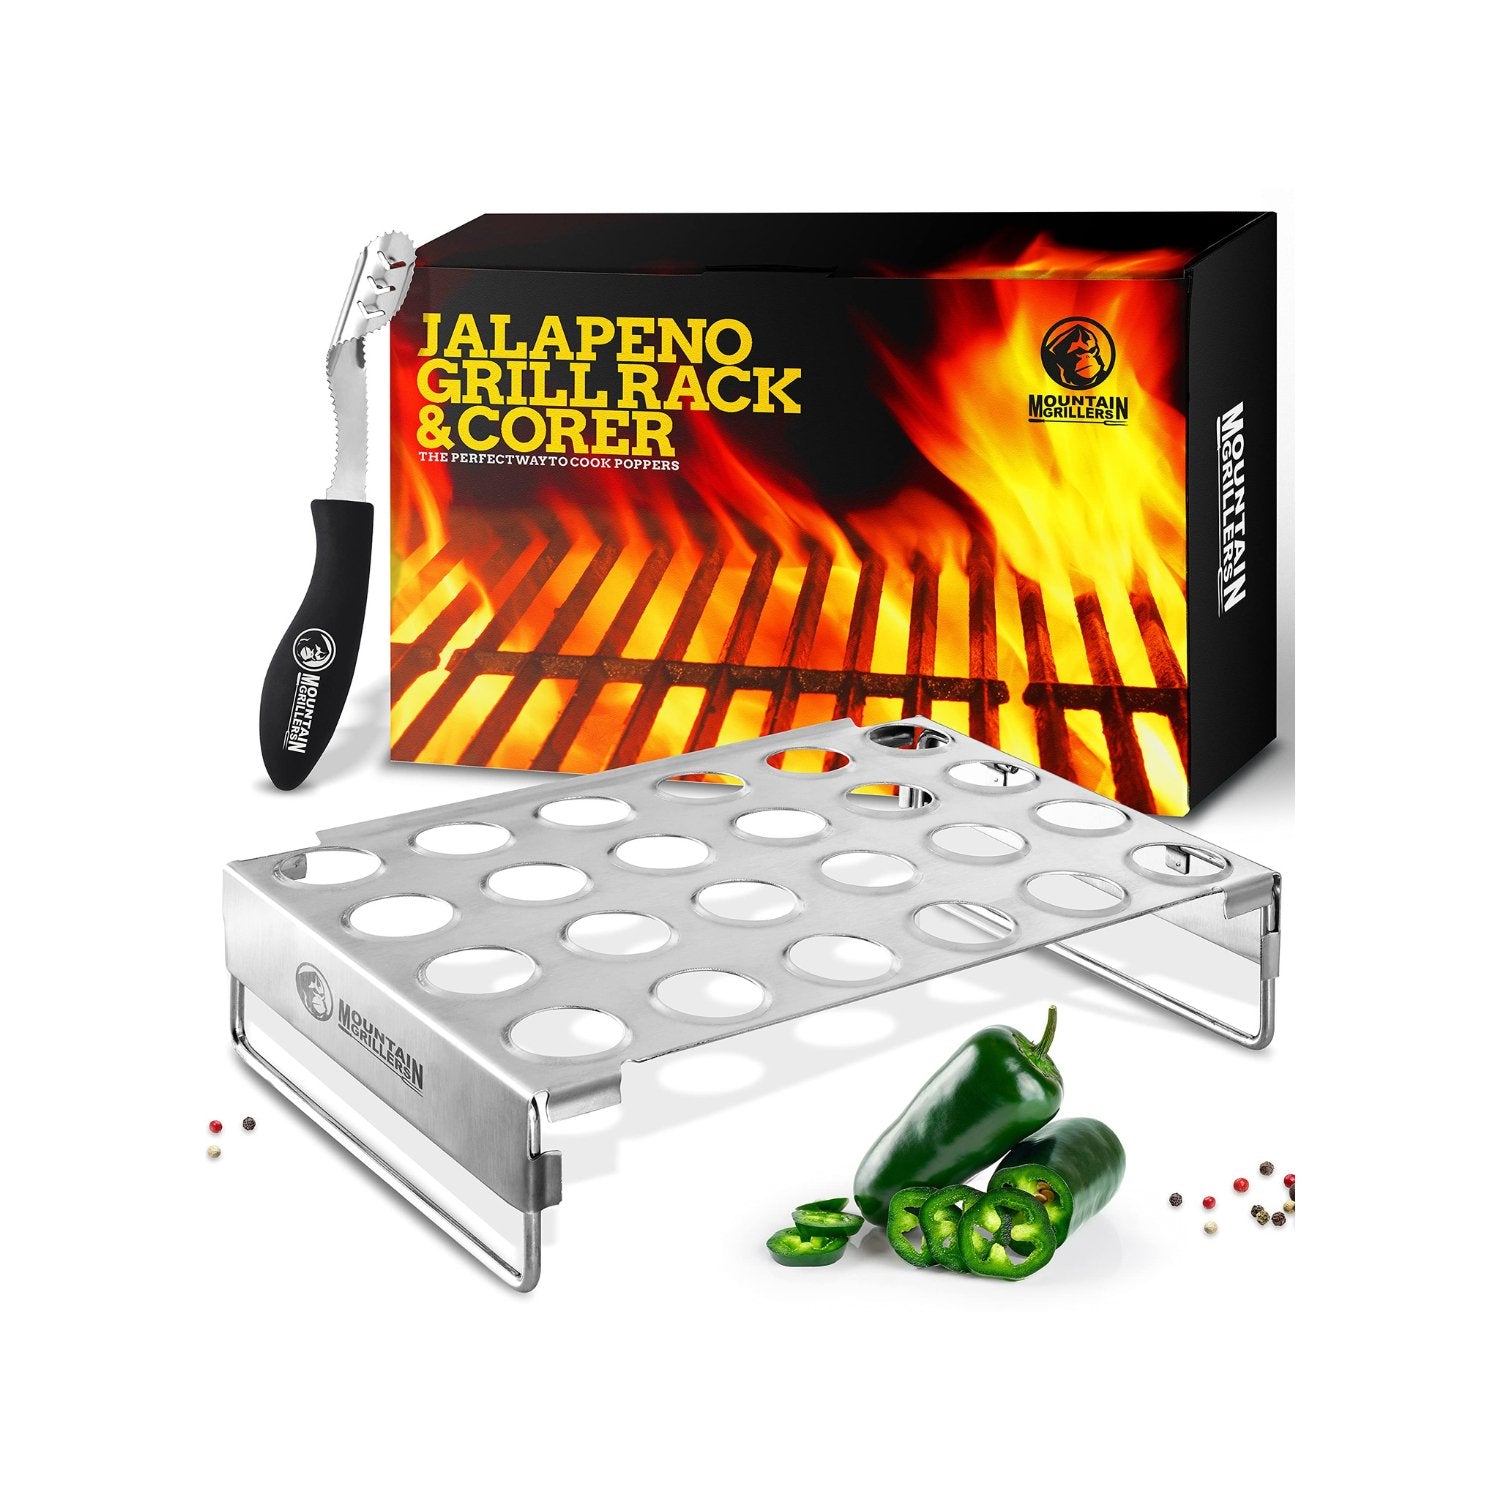 Jalapeno Pers Holder For Grill With Corer  Large 24 Hole Pepper Rack